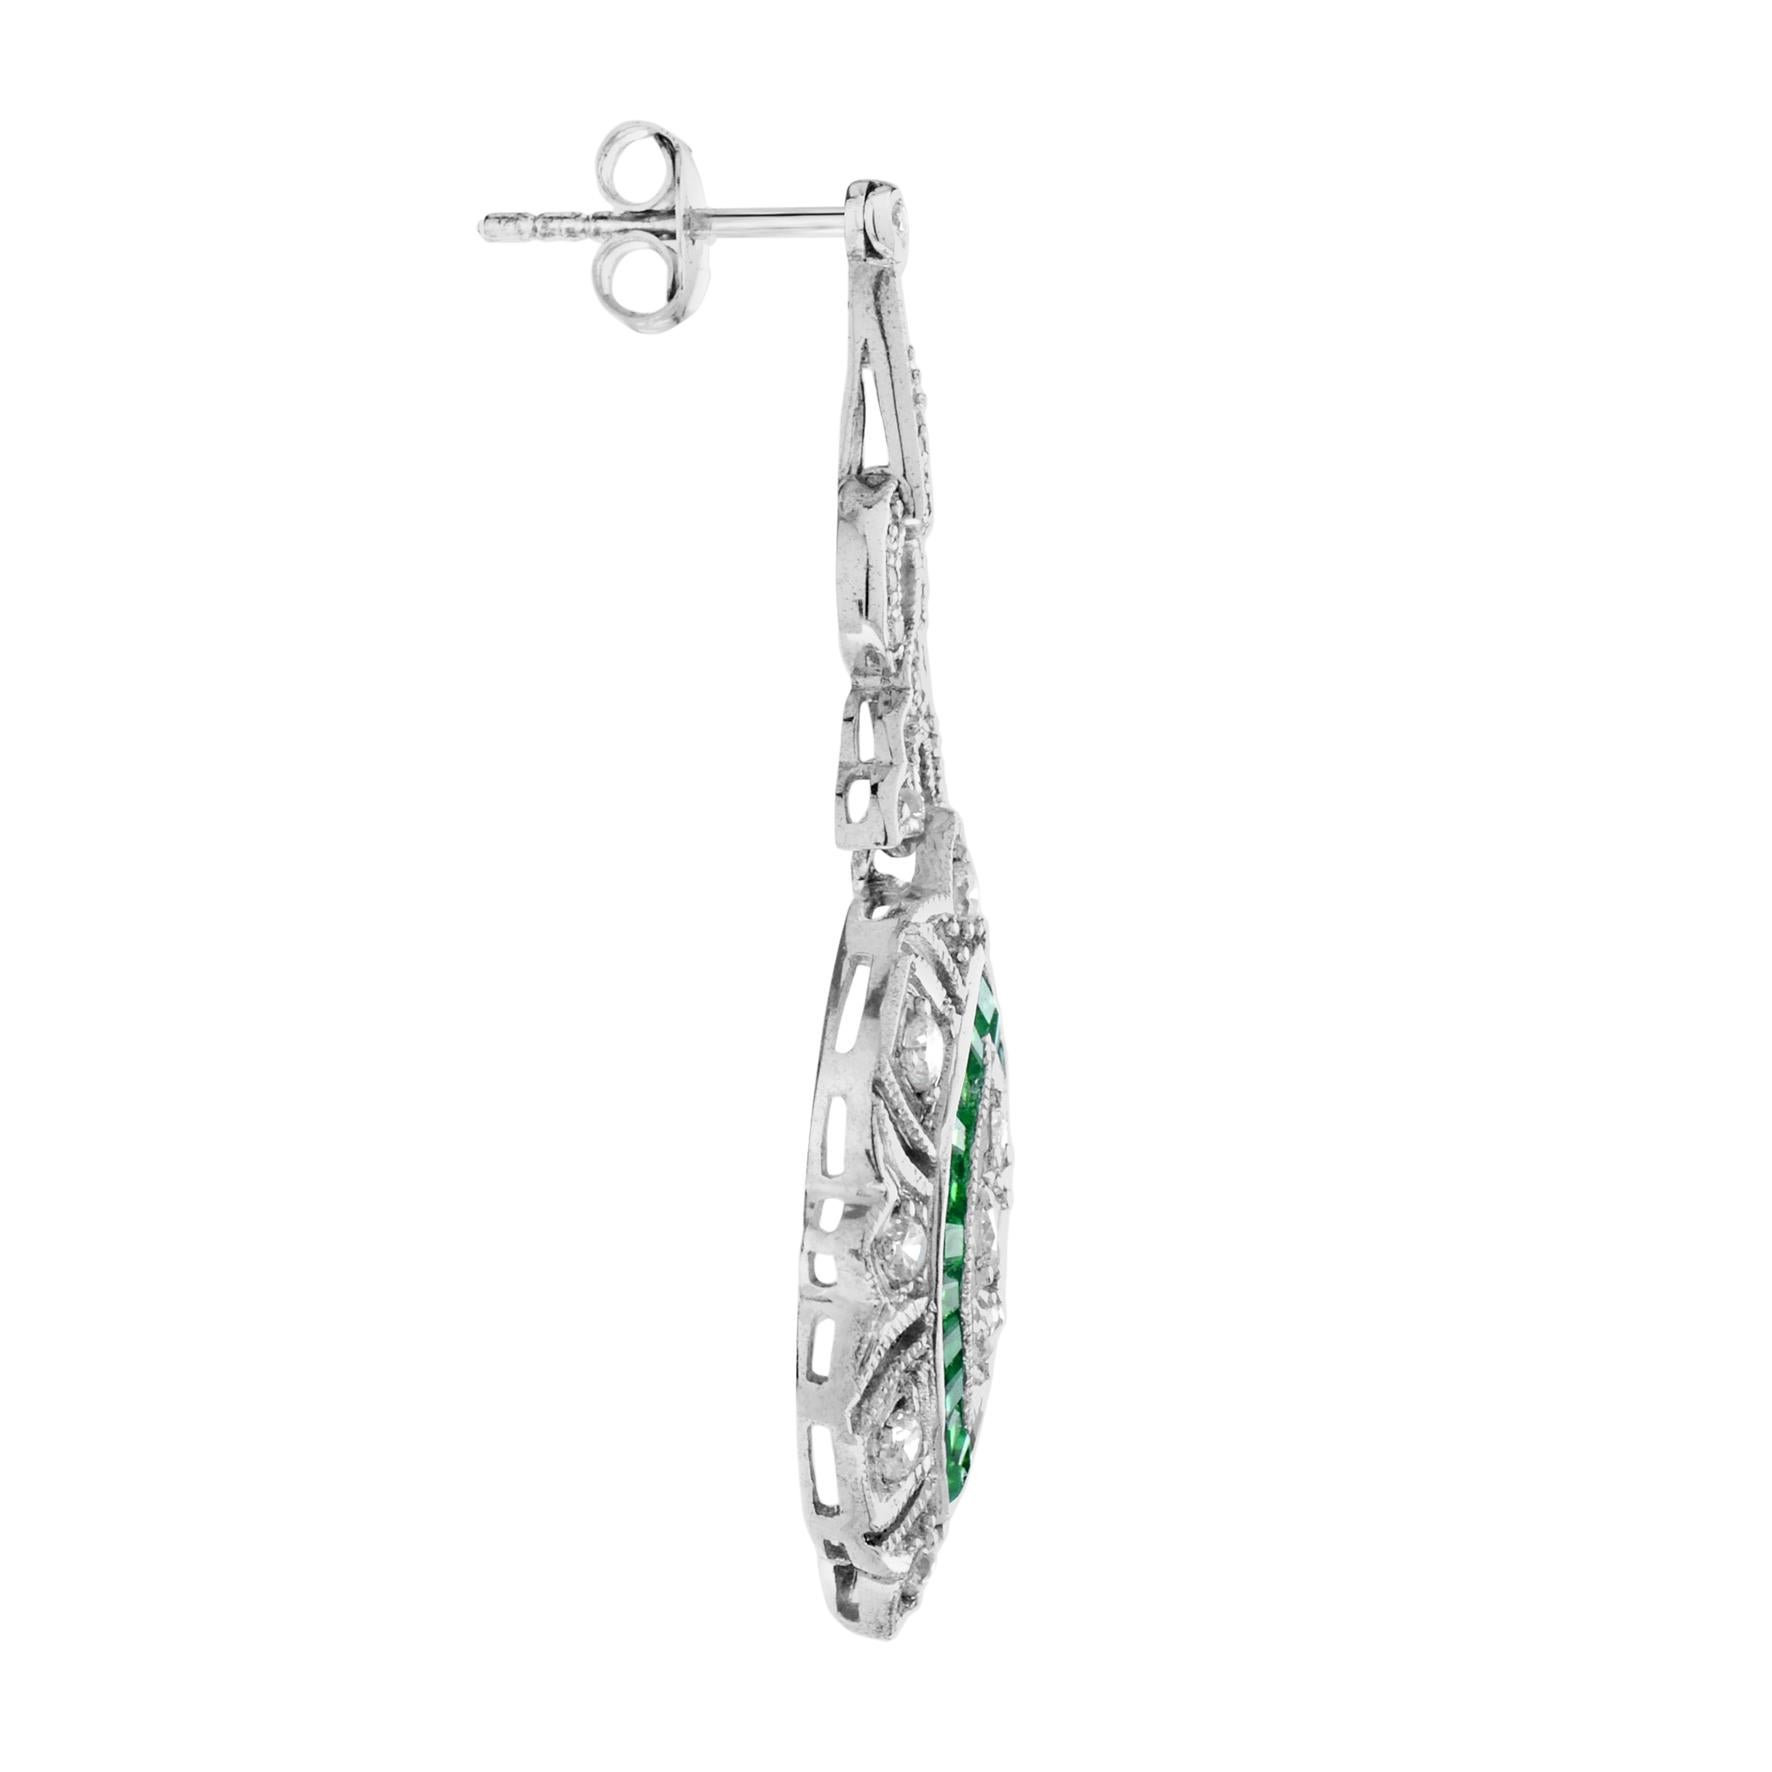 These beautiful Art Deco-style dangle earrings are finished in brightly polished 18K white gold. Delicately set across the face of the earrings are three round diamonds surrounded by French-cut natural emeralds. The entire earring is adorned with